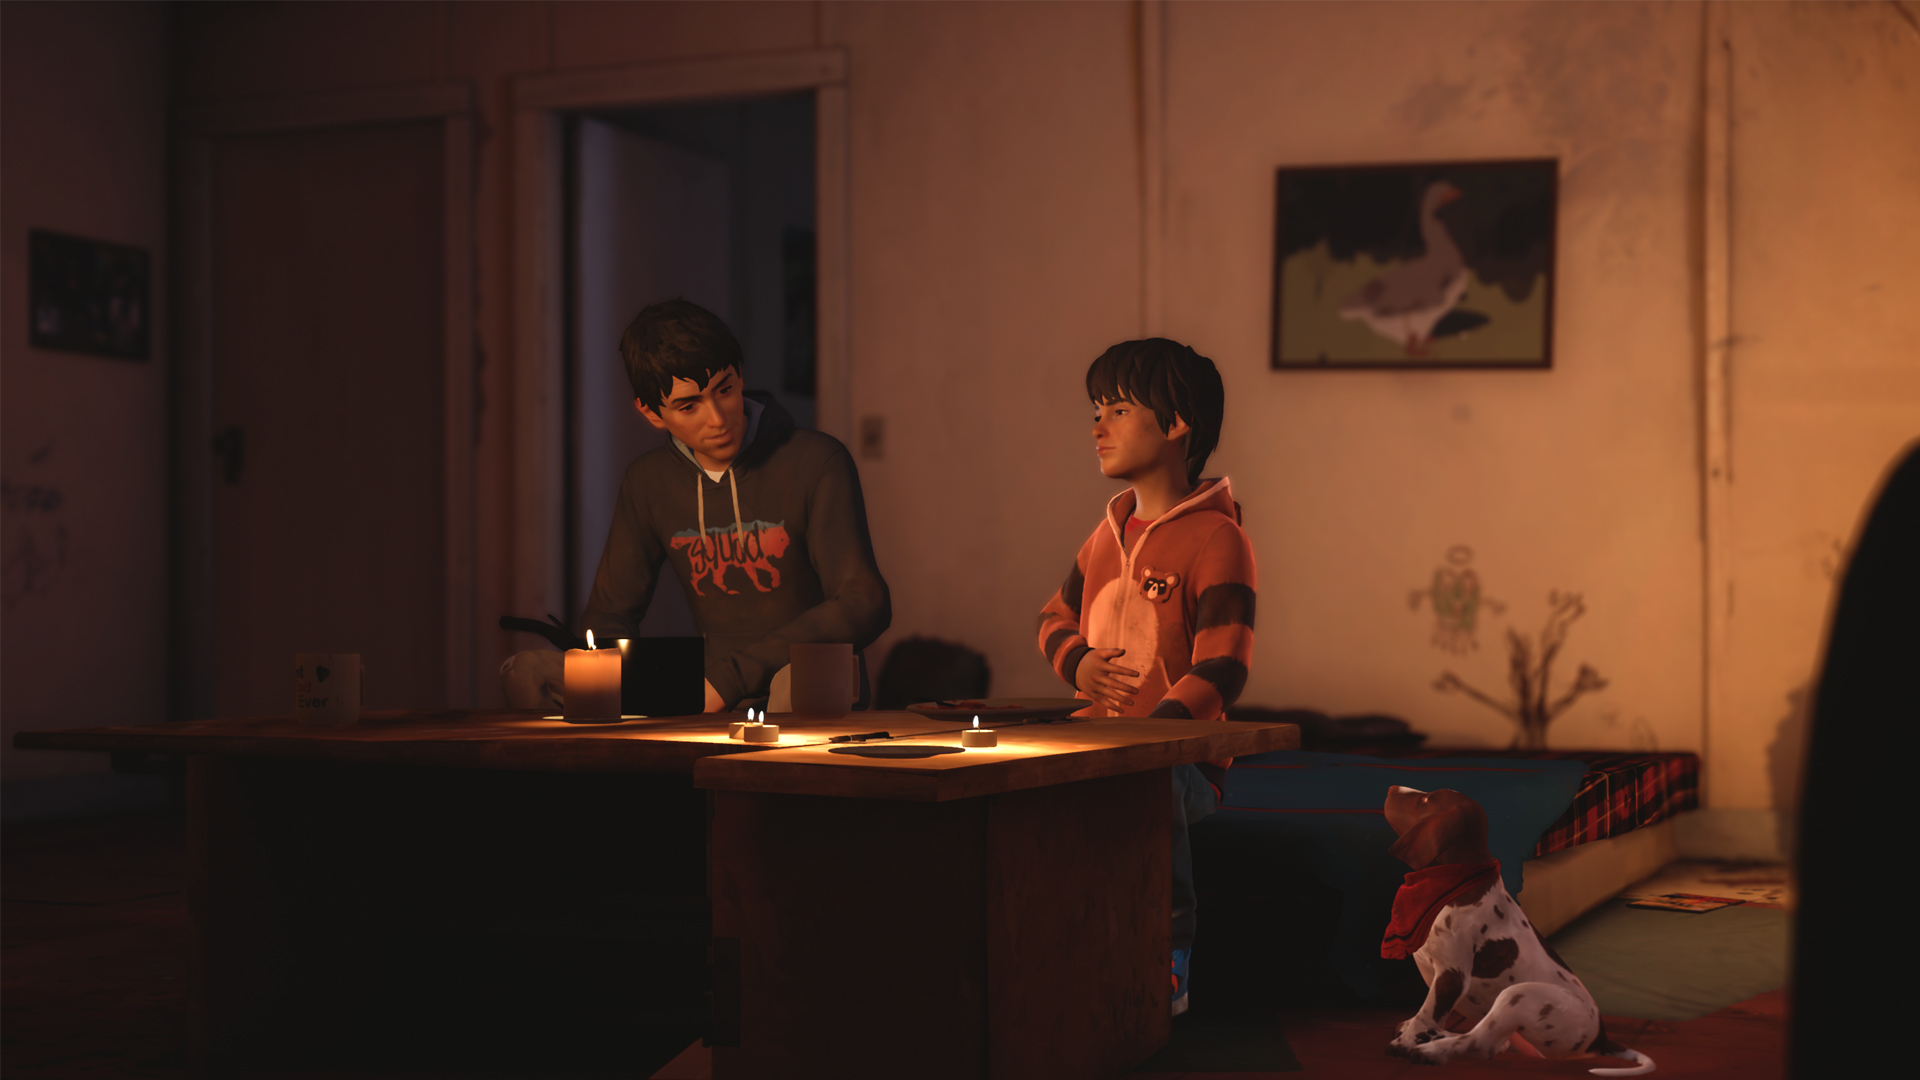 Life is Strange 2- Episode 2: Rules launches January 24, 2019